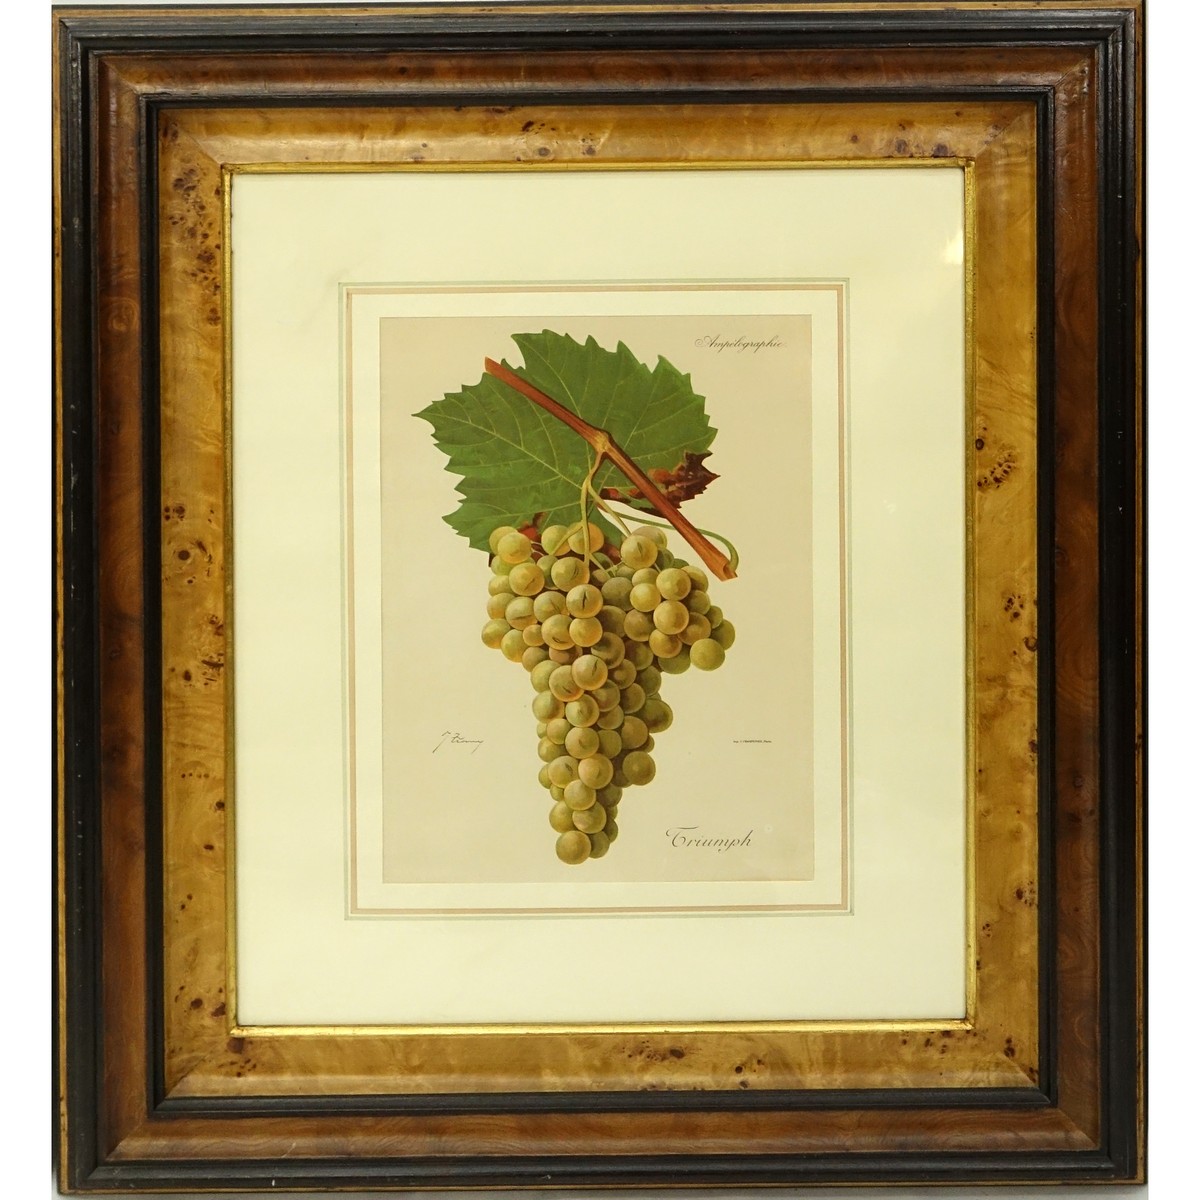 Modern Botanical Colored Lithograph. Nicely framed.